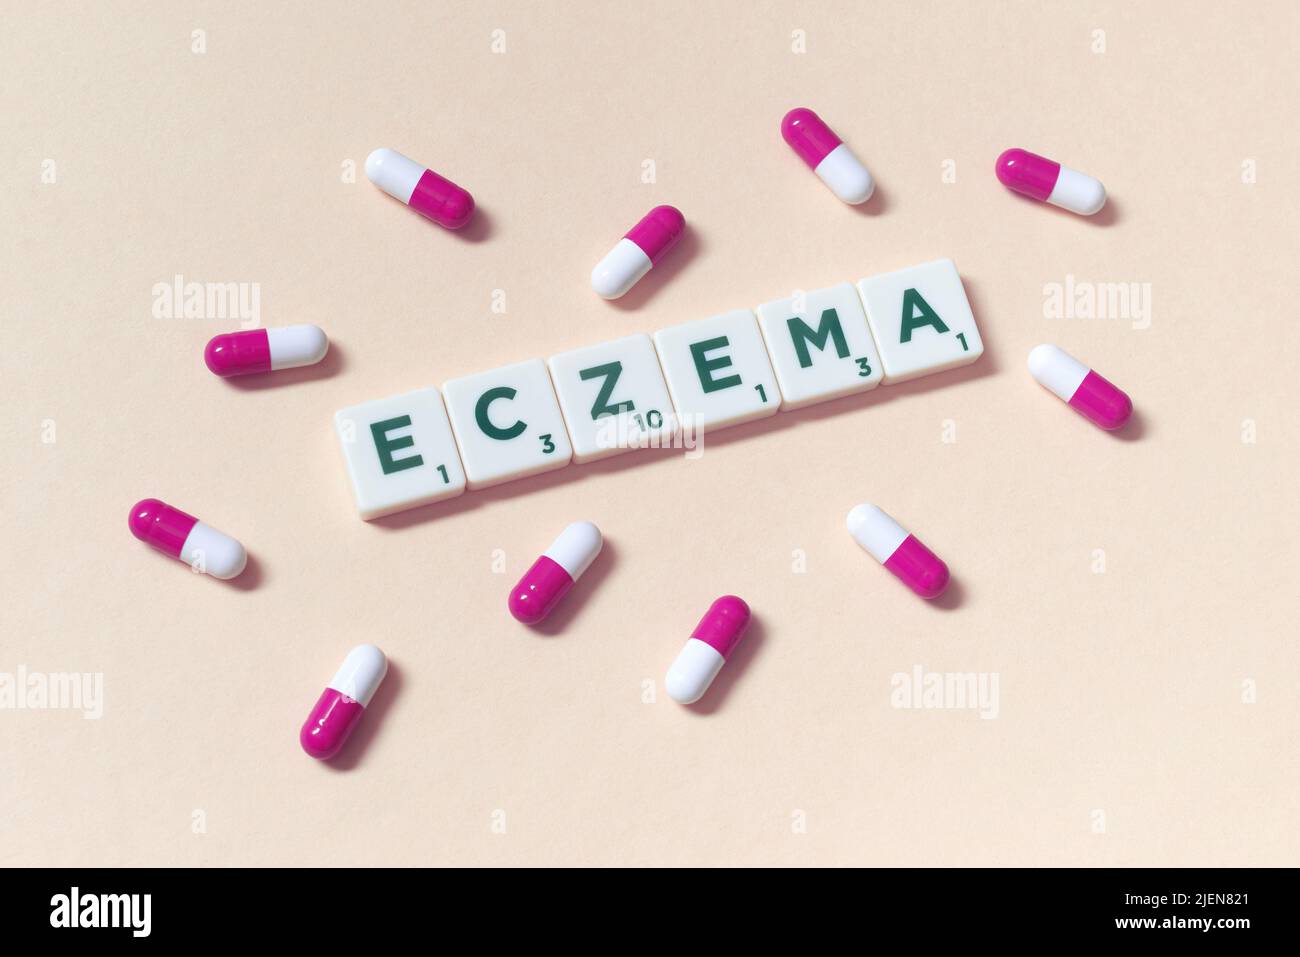 Eczema formed of scrabble tiles and pharmaceutical capsules. Stock Photo